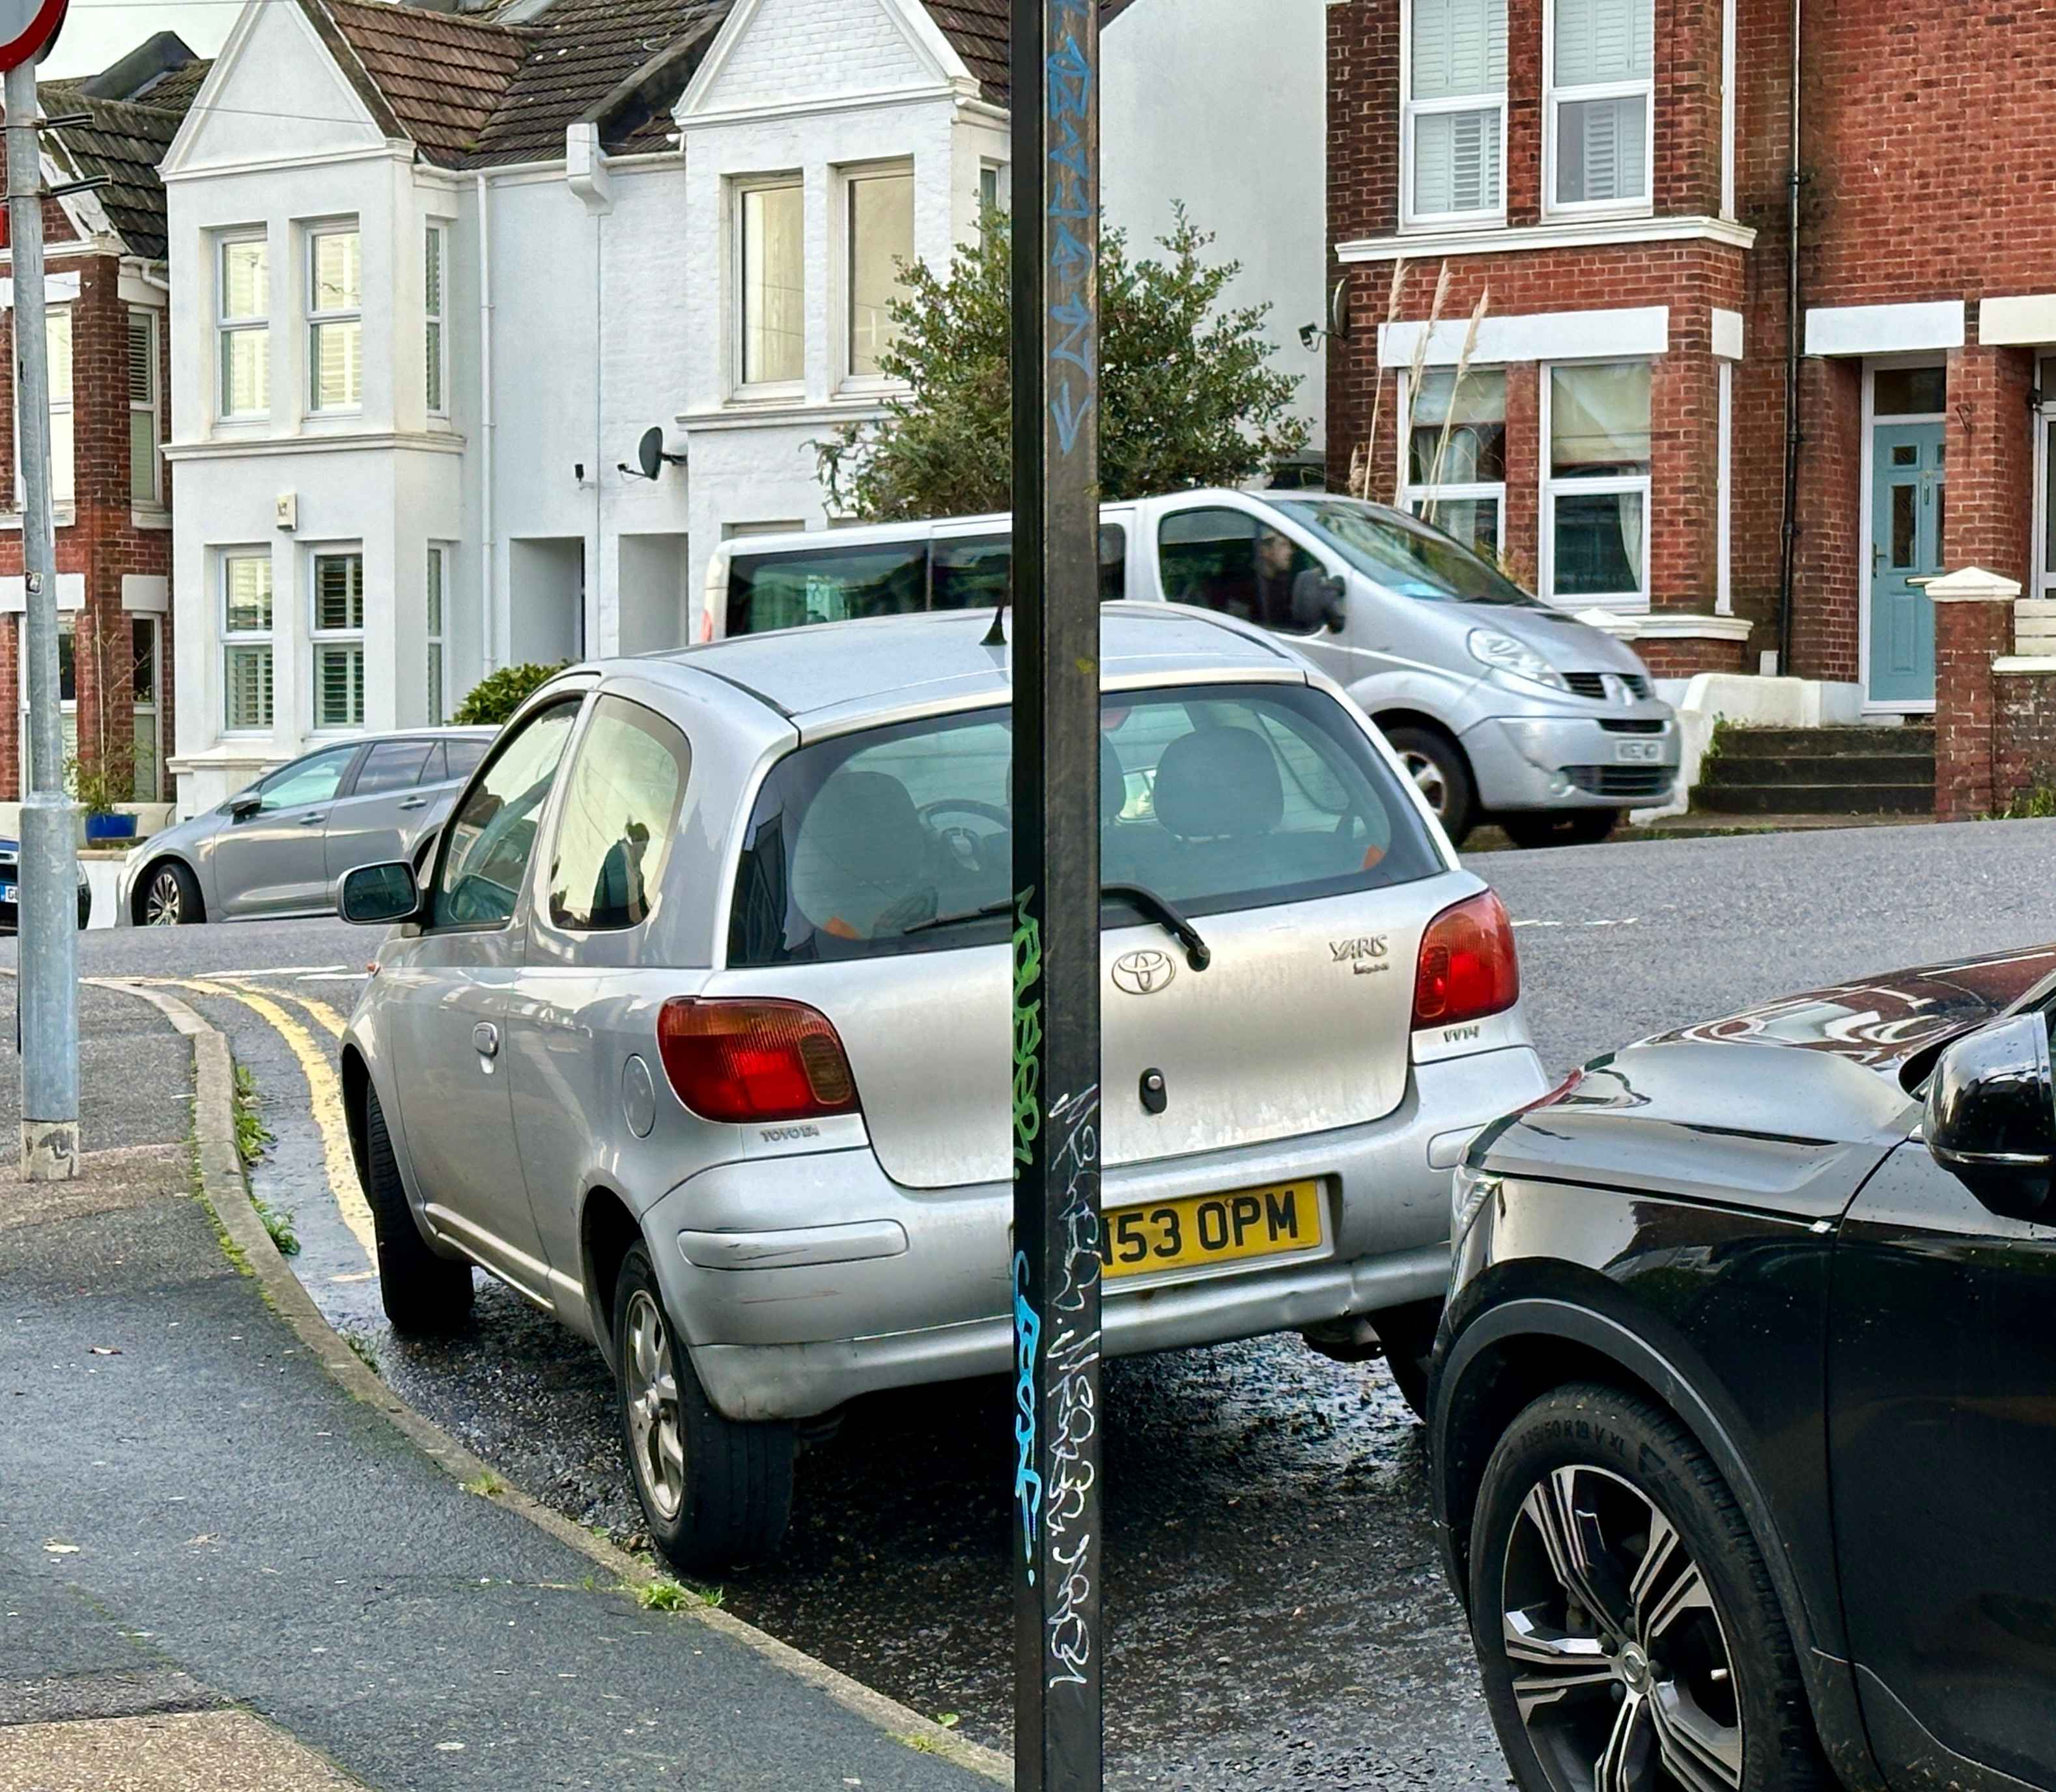 Photograph of FN53 OPM - a Silver Toyota Yaris parked in Hollingdean by a non-resident. The second of five photographs supplied by the residents of Hollingdean.